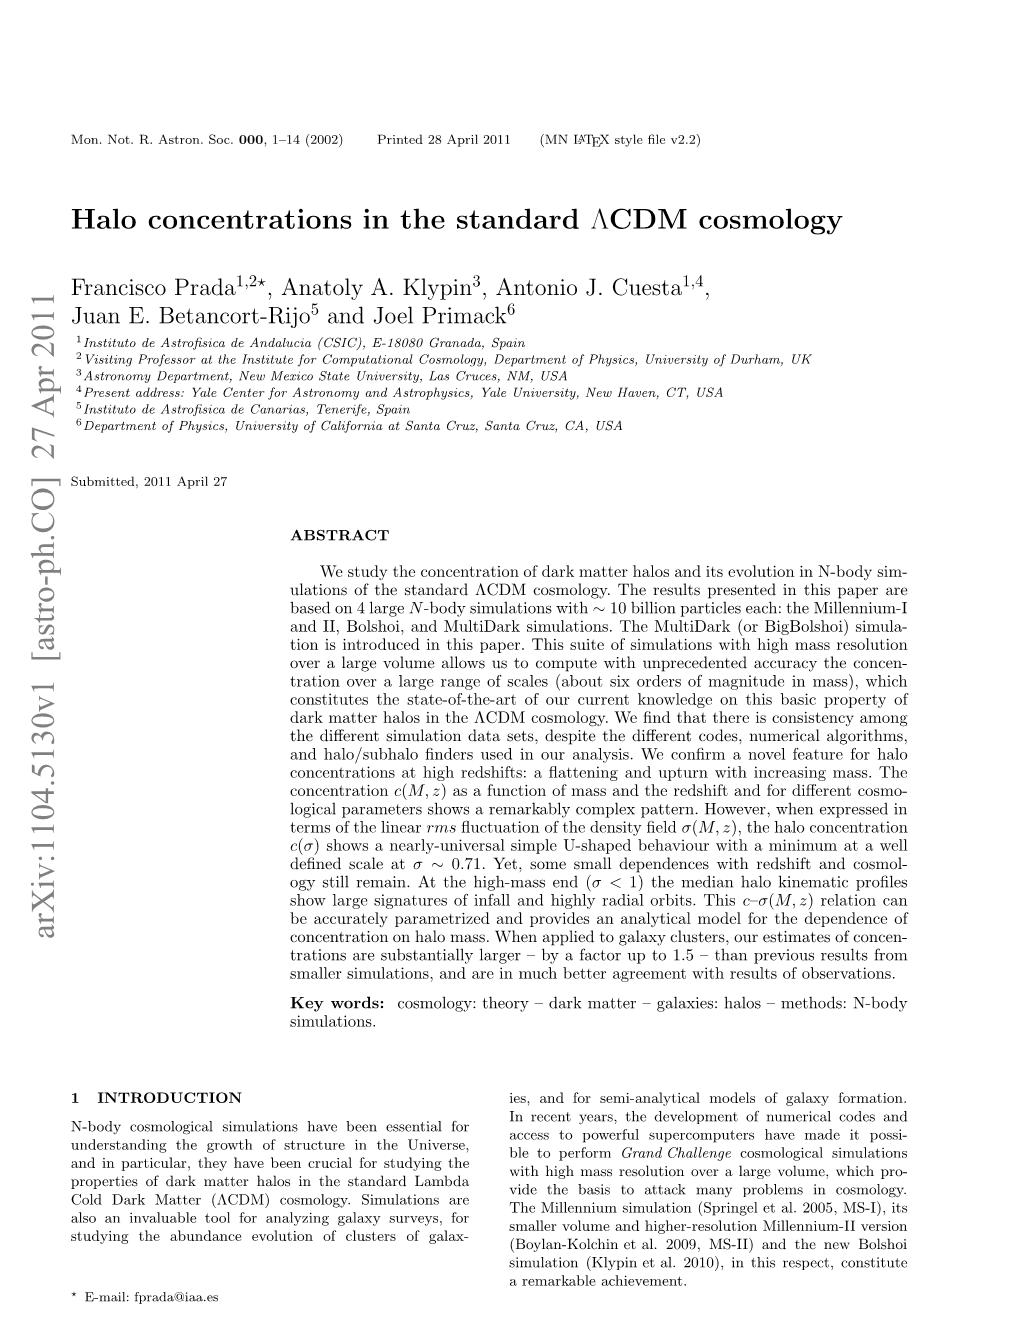 Halo Concentrations in the Standard ΛCDM Cosmology